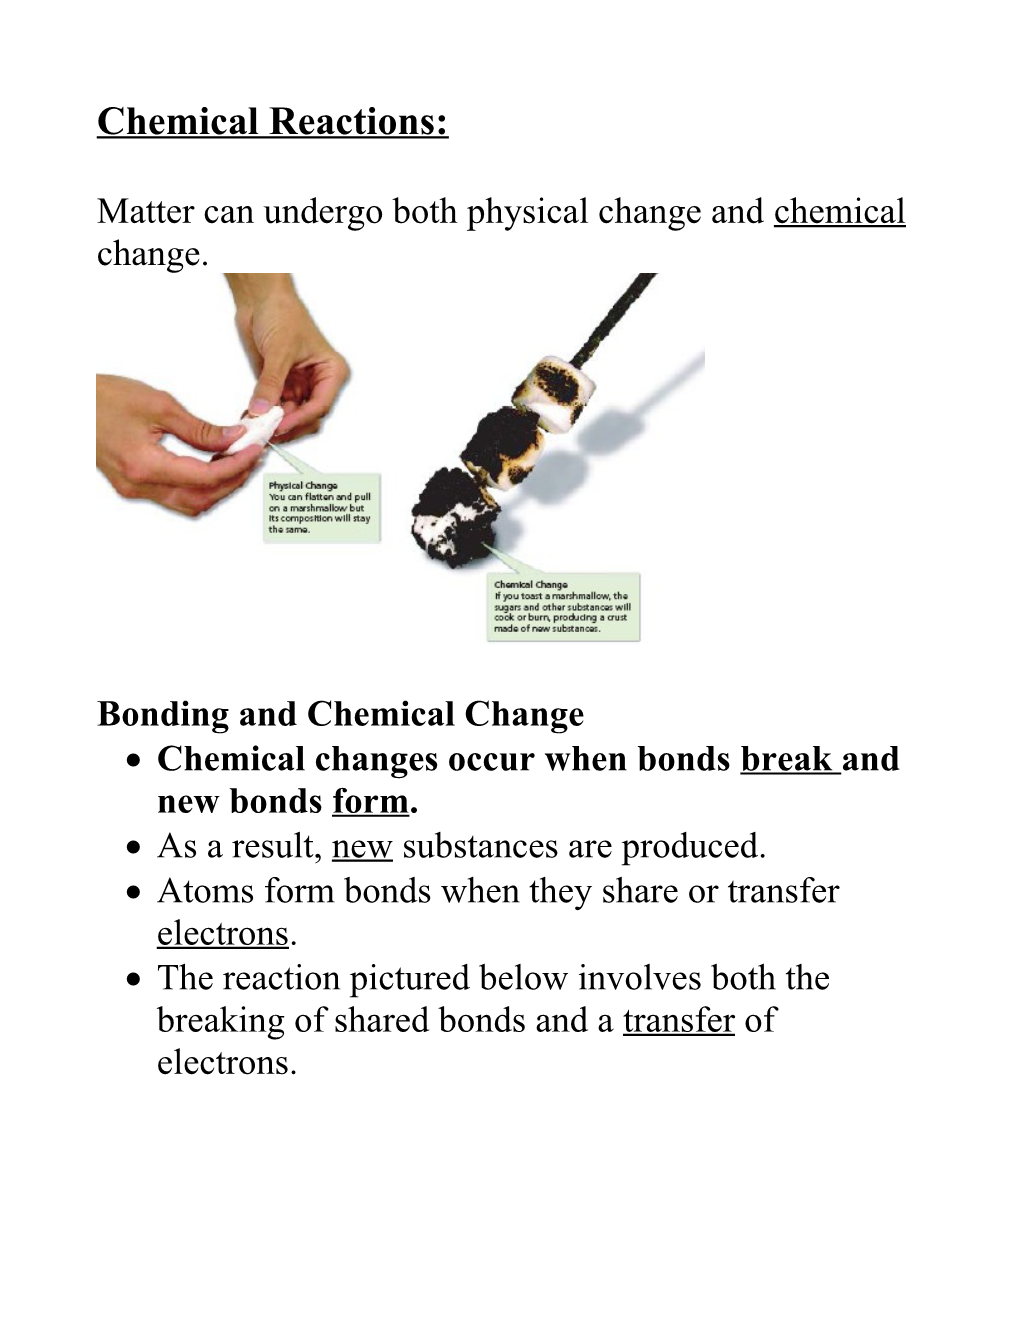 Matter Can Undergo Both Physical Change and Chemical Change